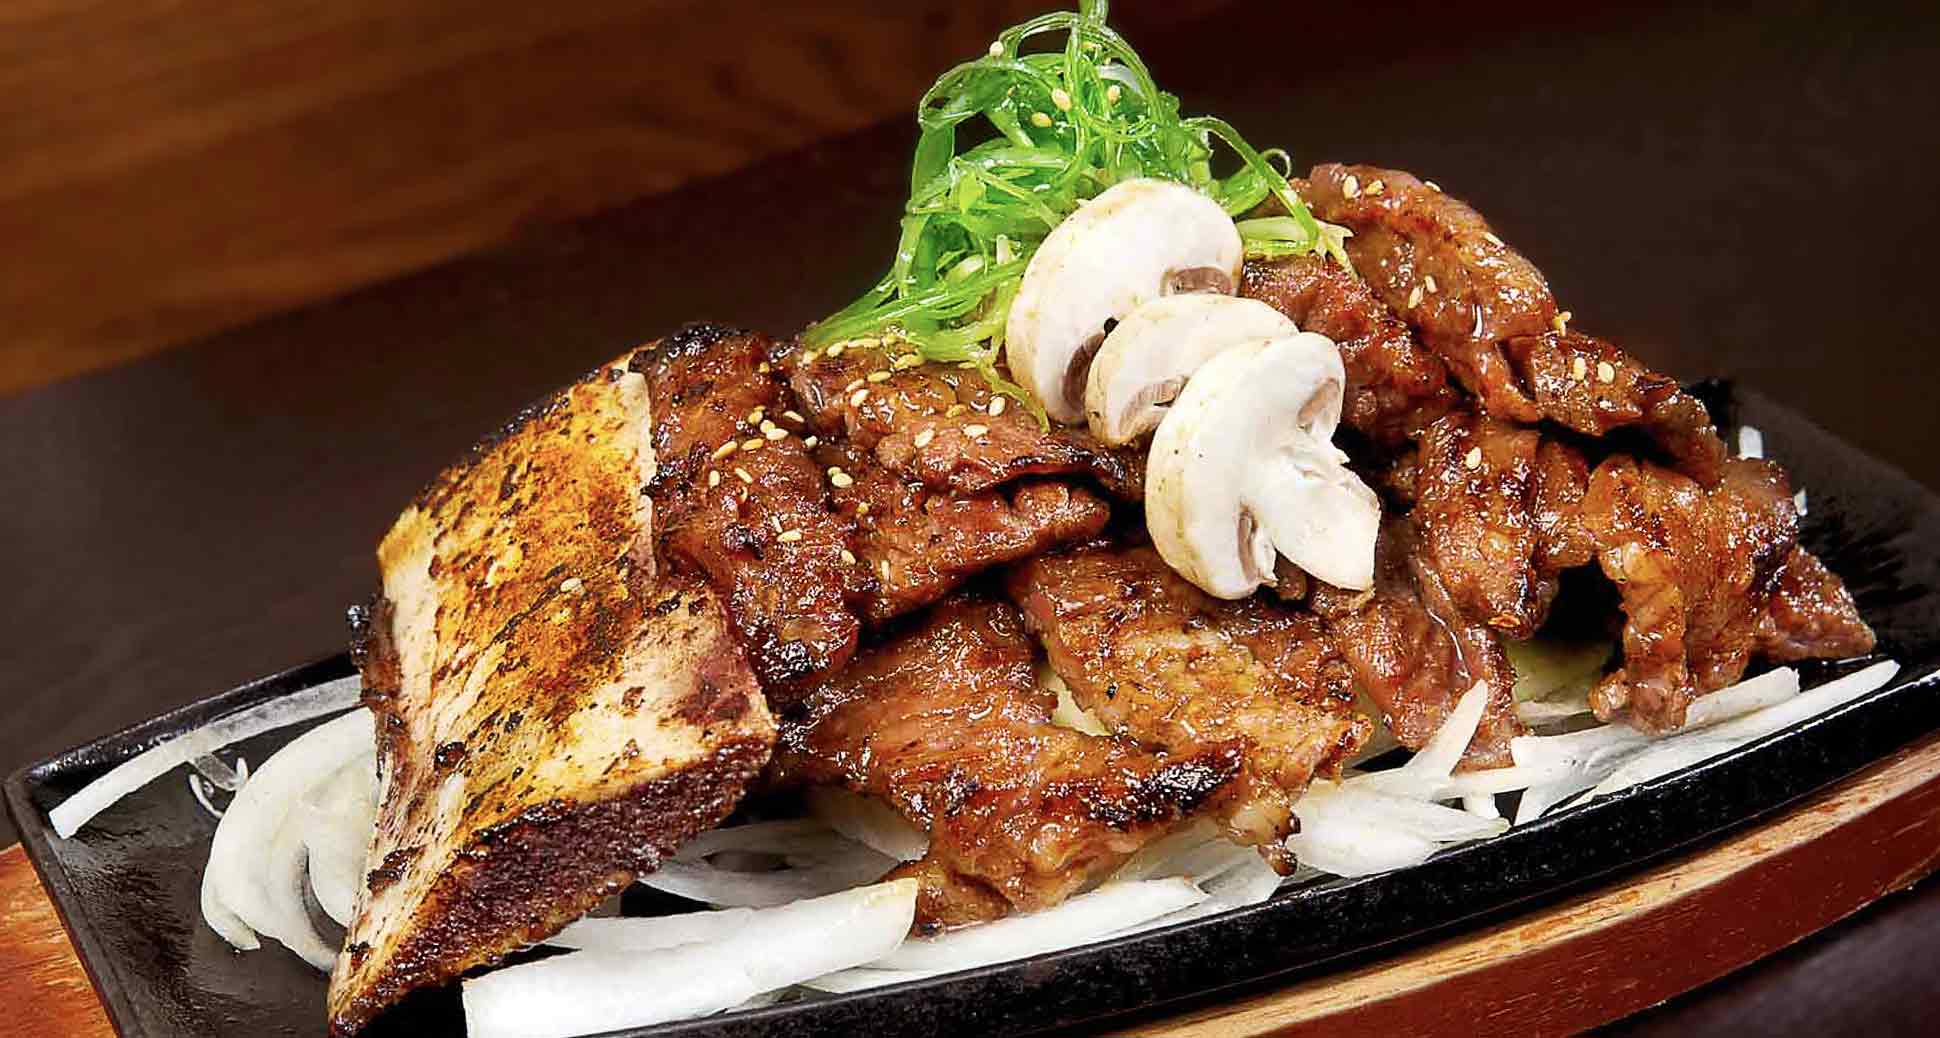 SURA Family Events: Get 50% off on Your 2nd Barbecue Order!